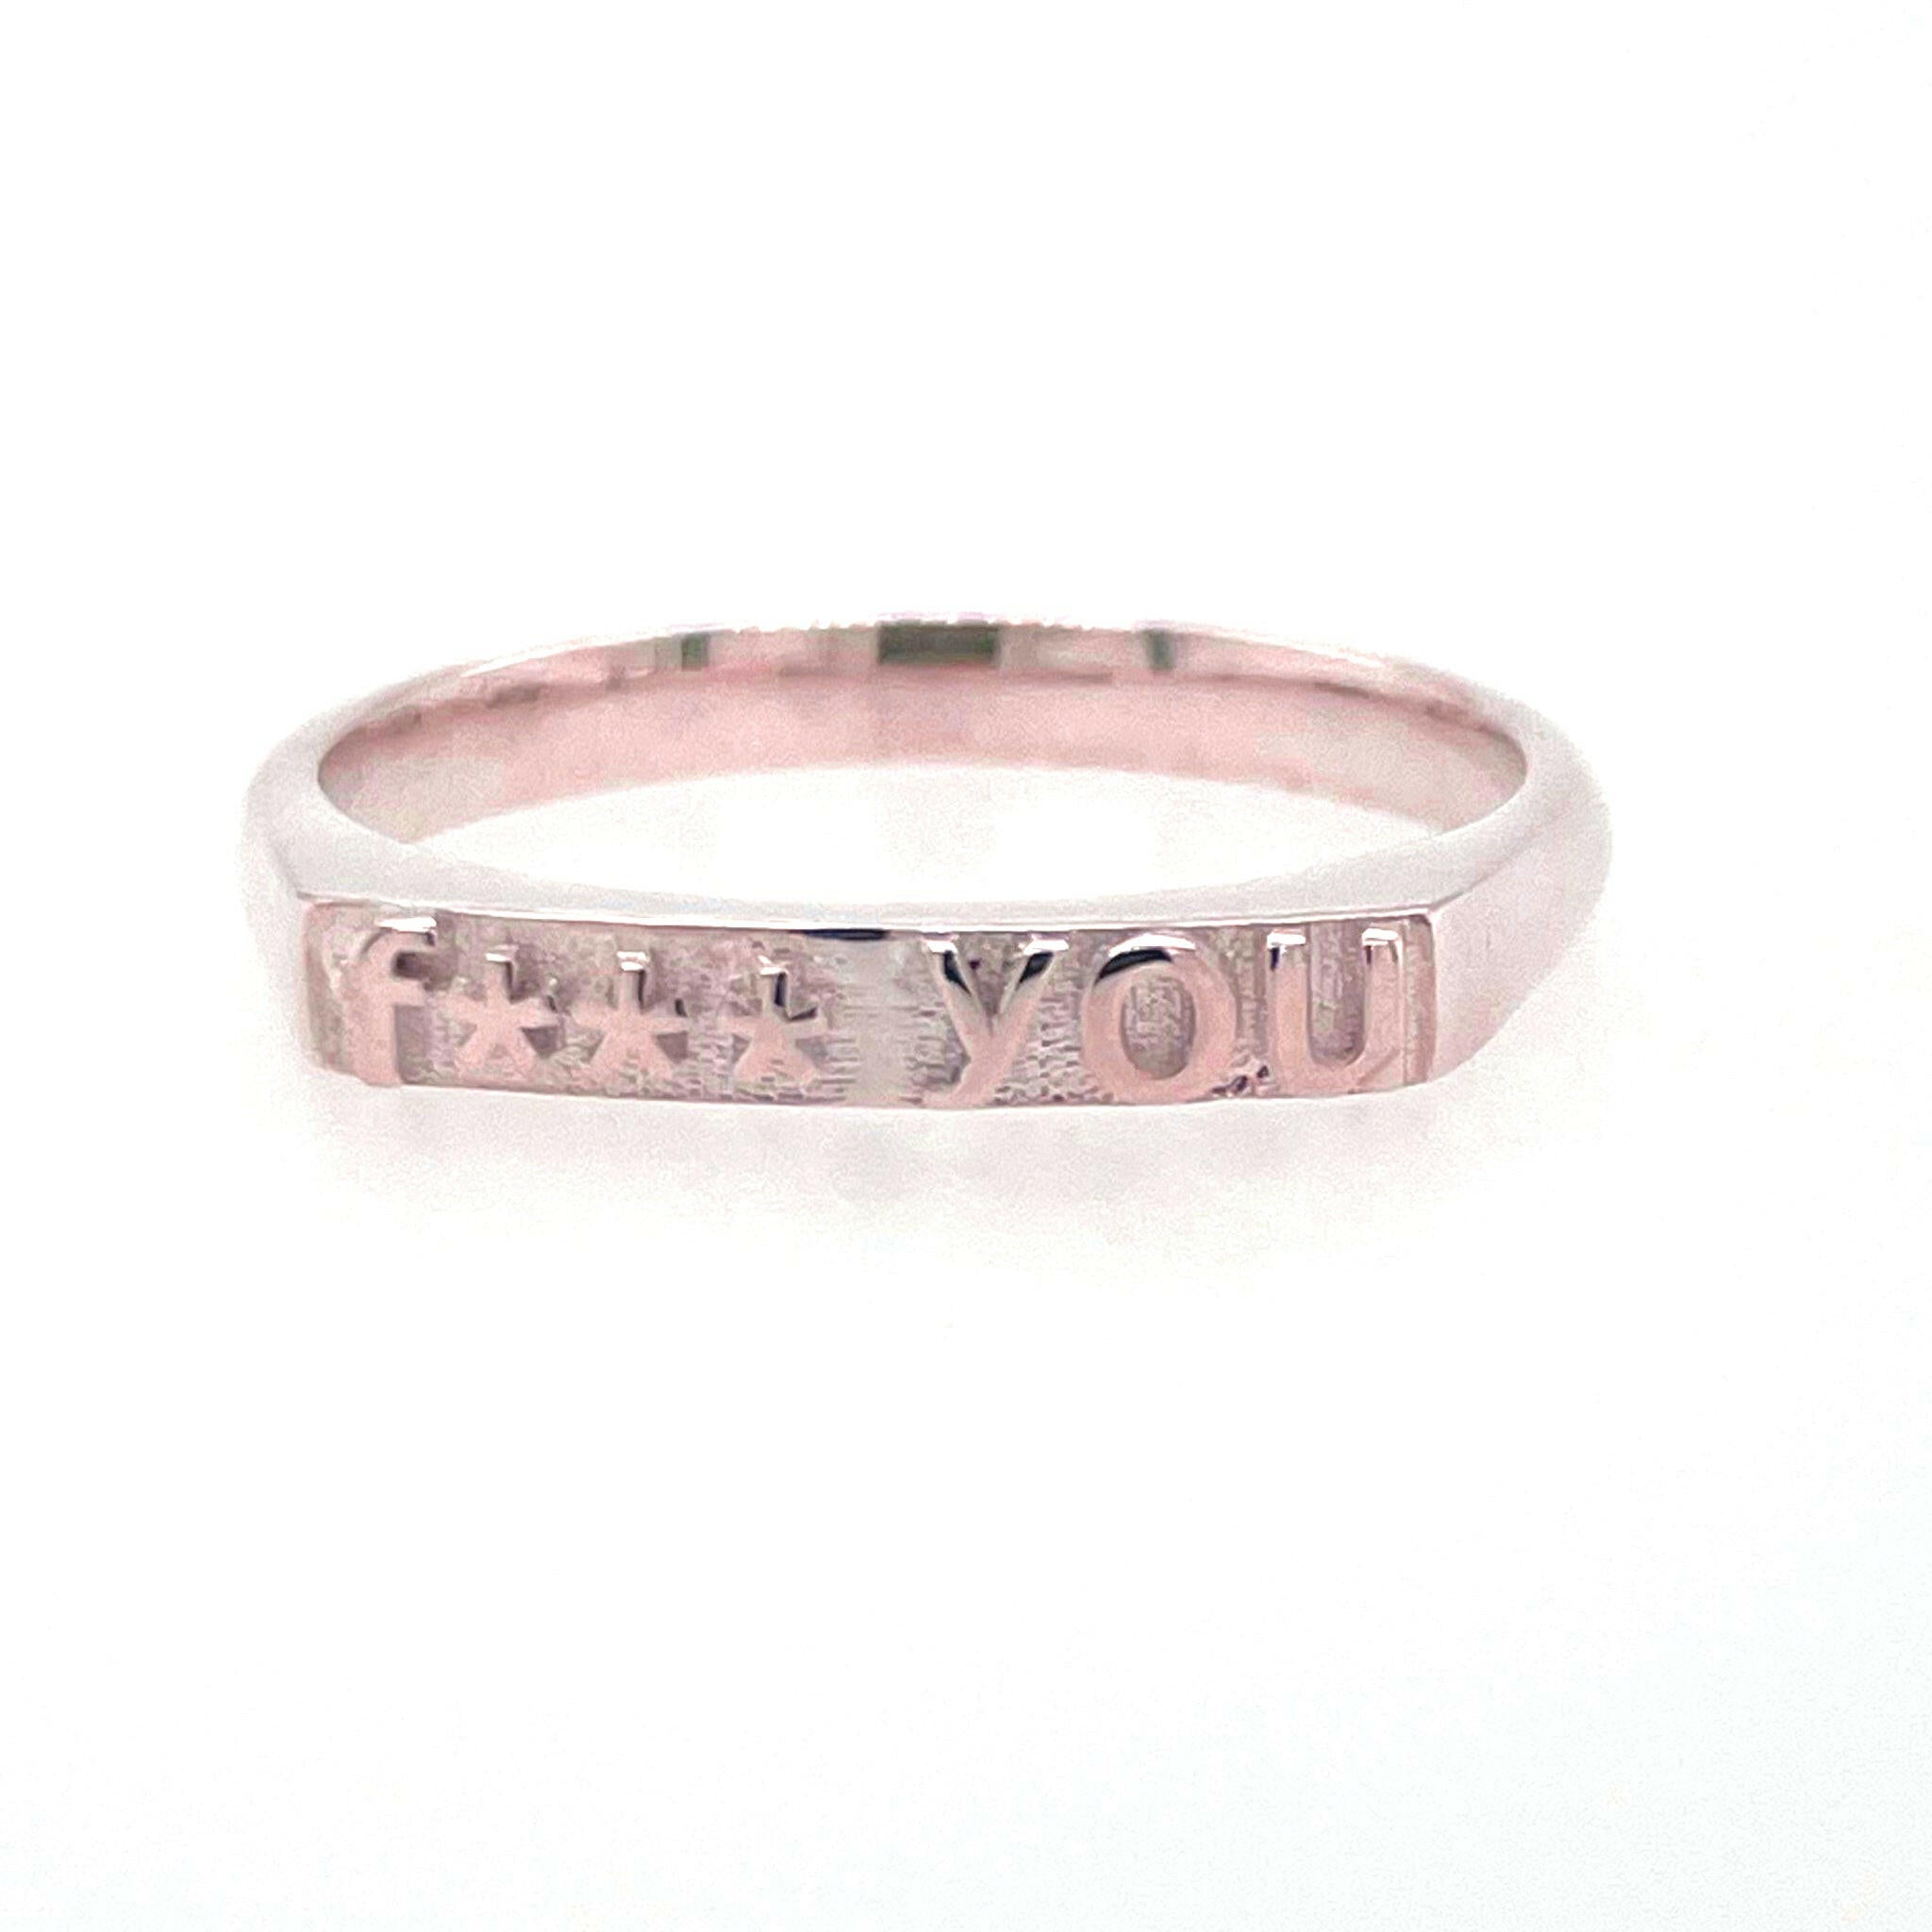 front view of ring in 14 karat rose gold with text that reads "fuck you" but with 4 asterisks to censor fuck, therefore says "f*** you"